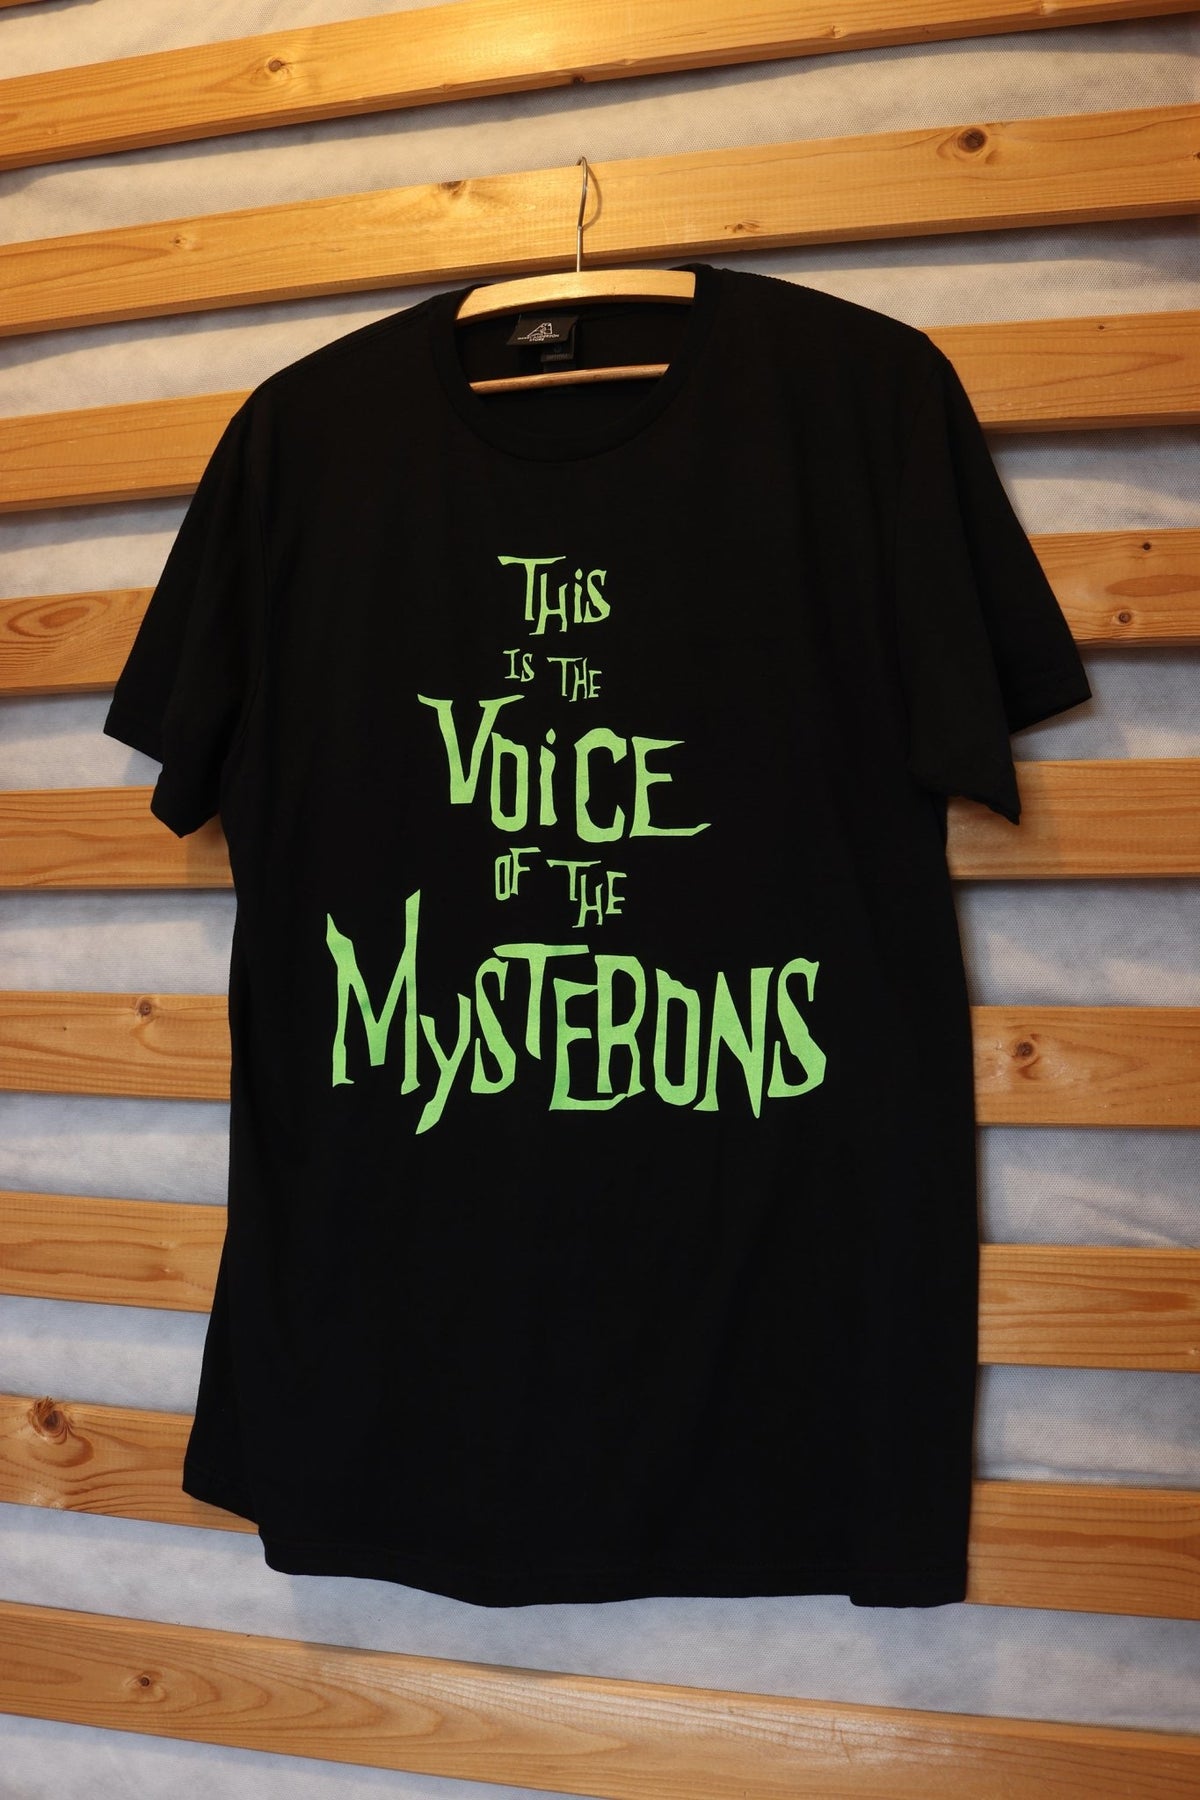 "This is the Voice of the Mysterons" T-Shirt [Limited Edition] - The Gerry Anderson Store